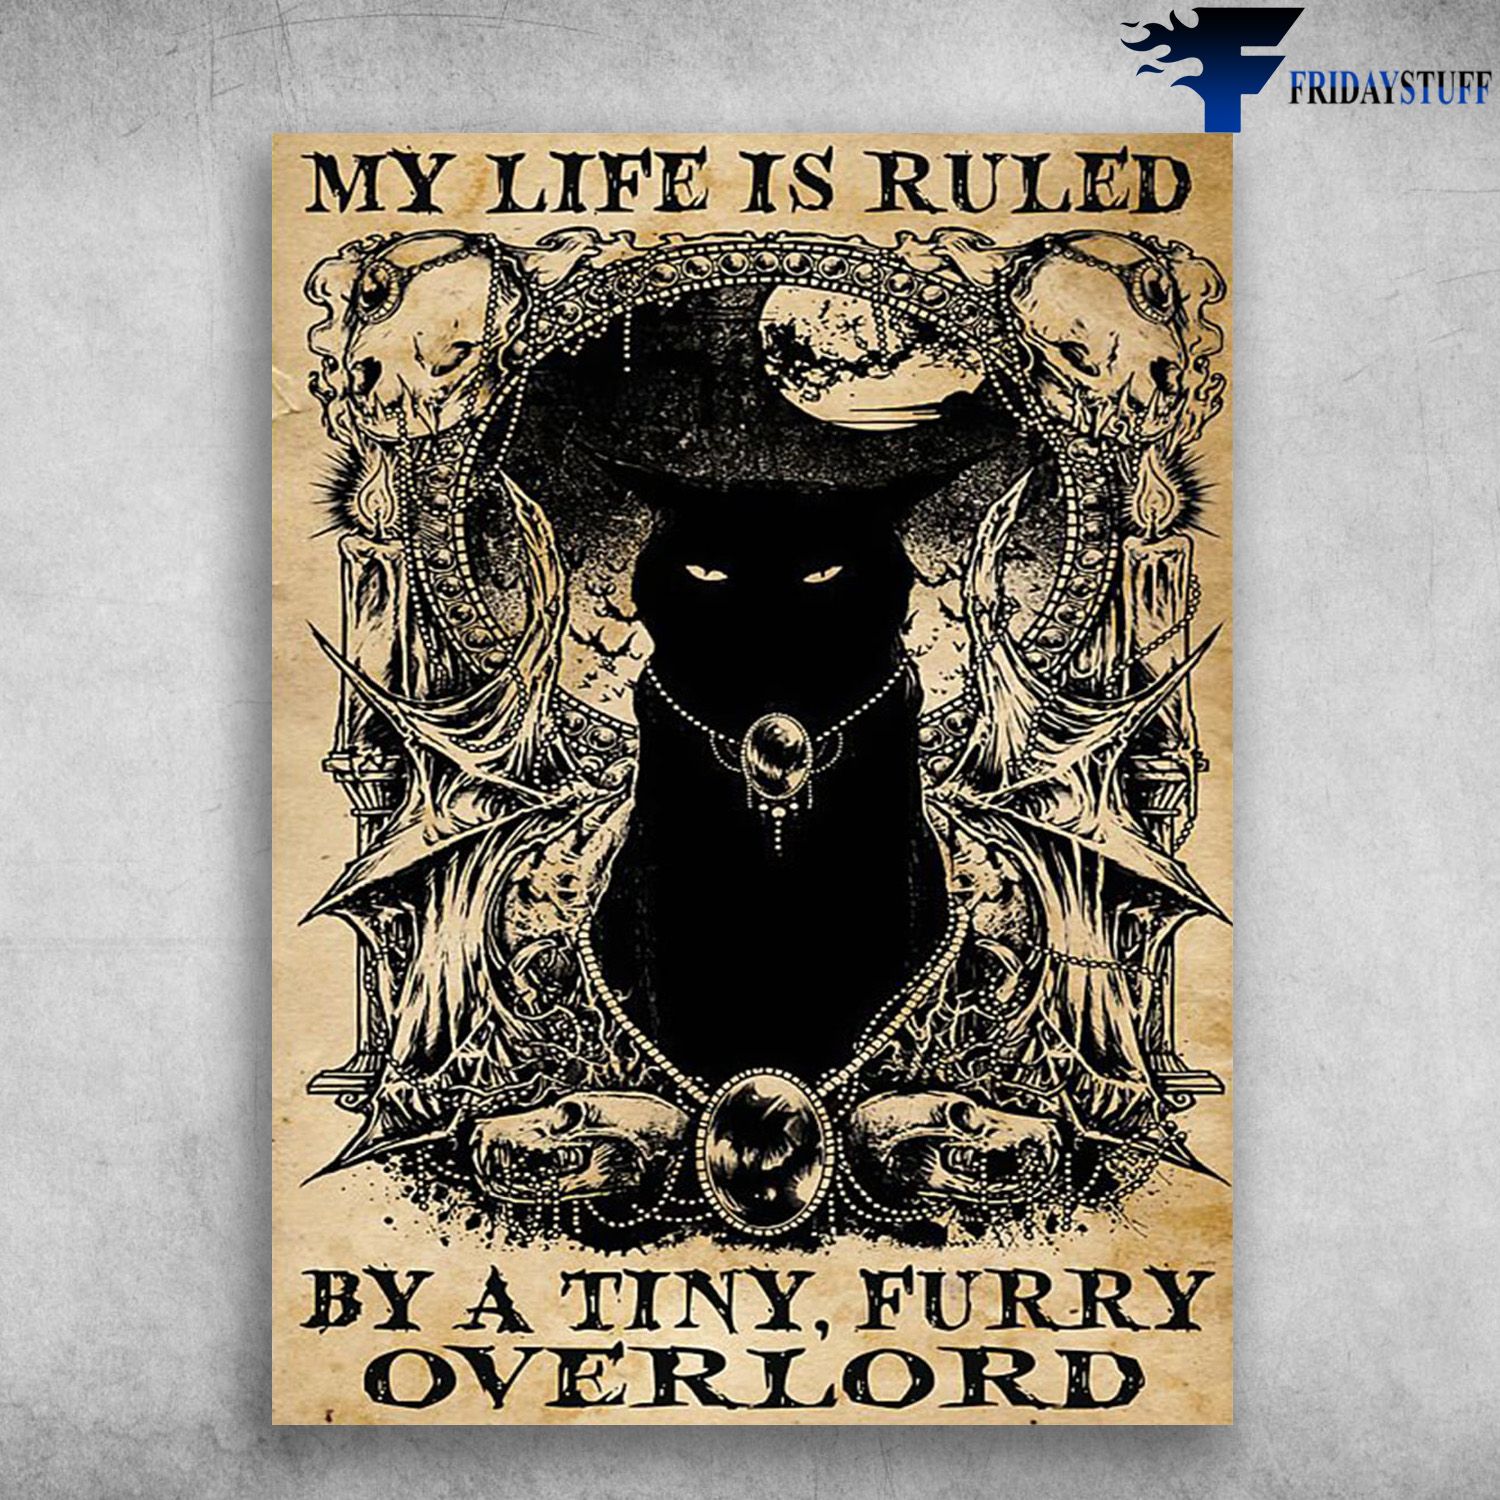 Black Cat, Hallowen Poster - My Life Is Ruled, By A Tiny, Furry Overlord